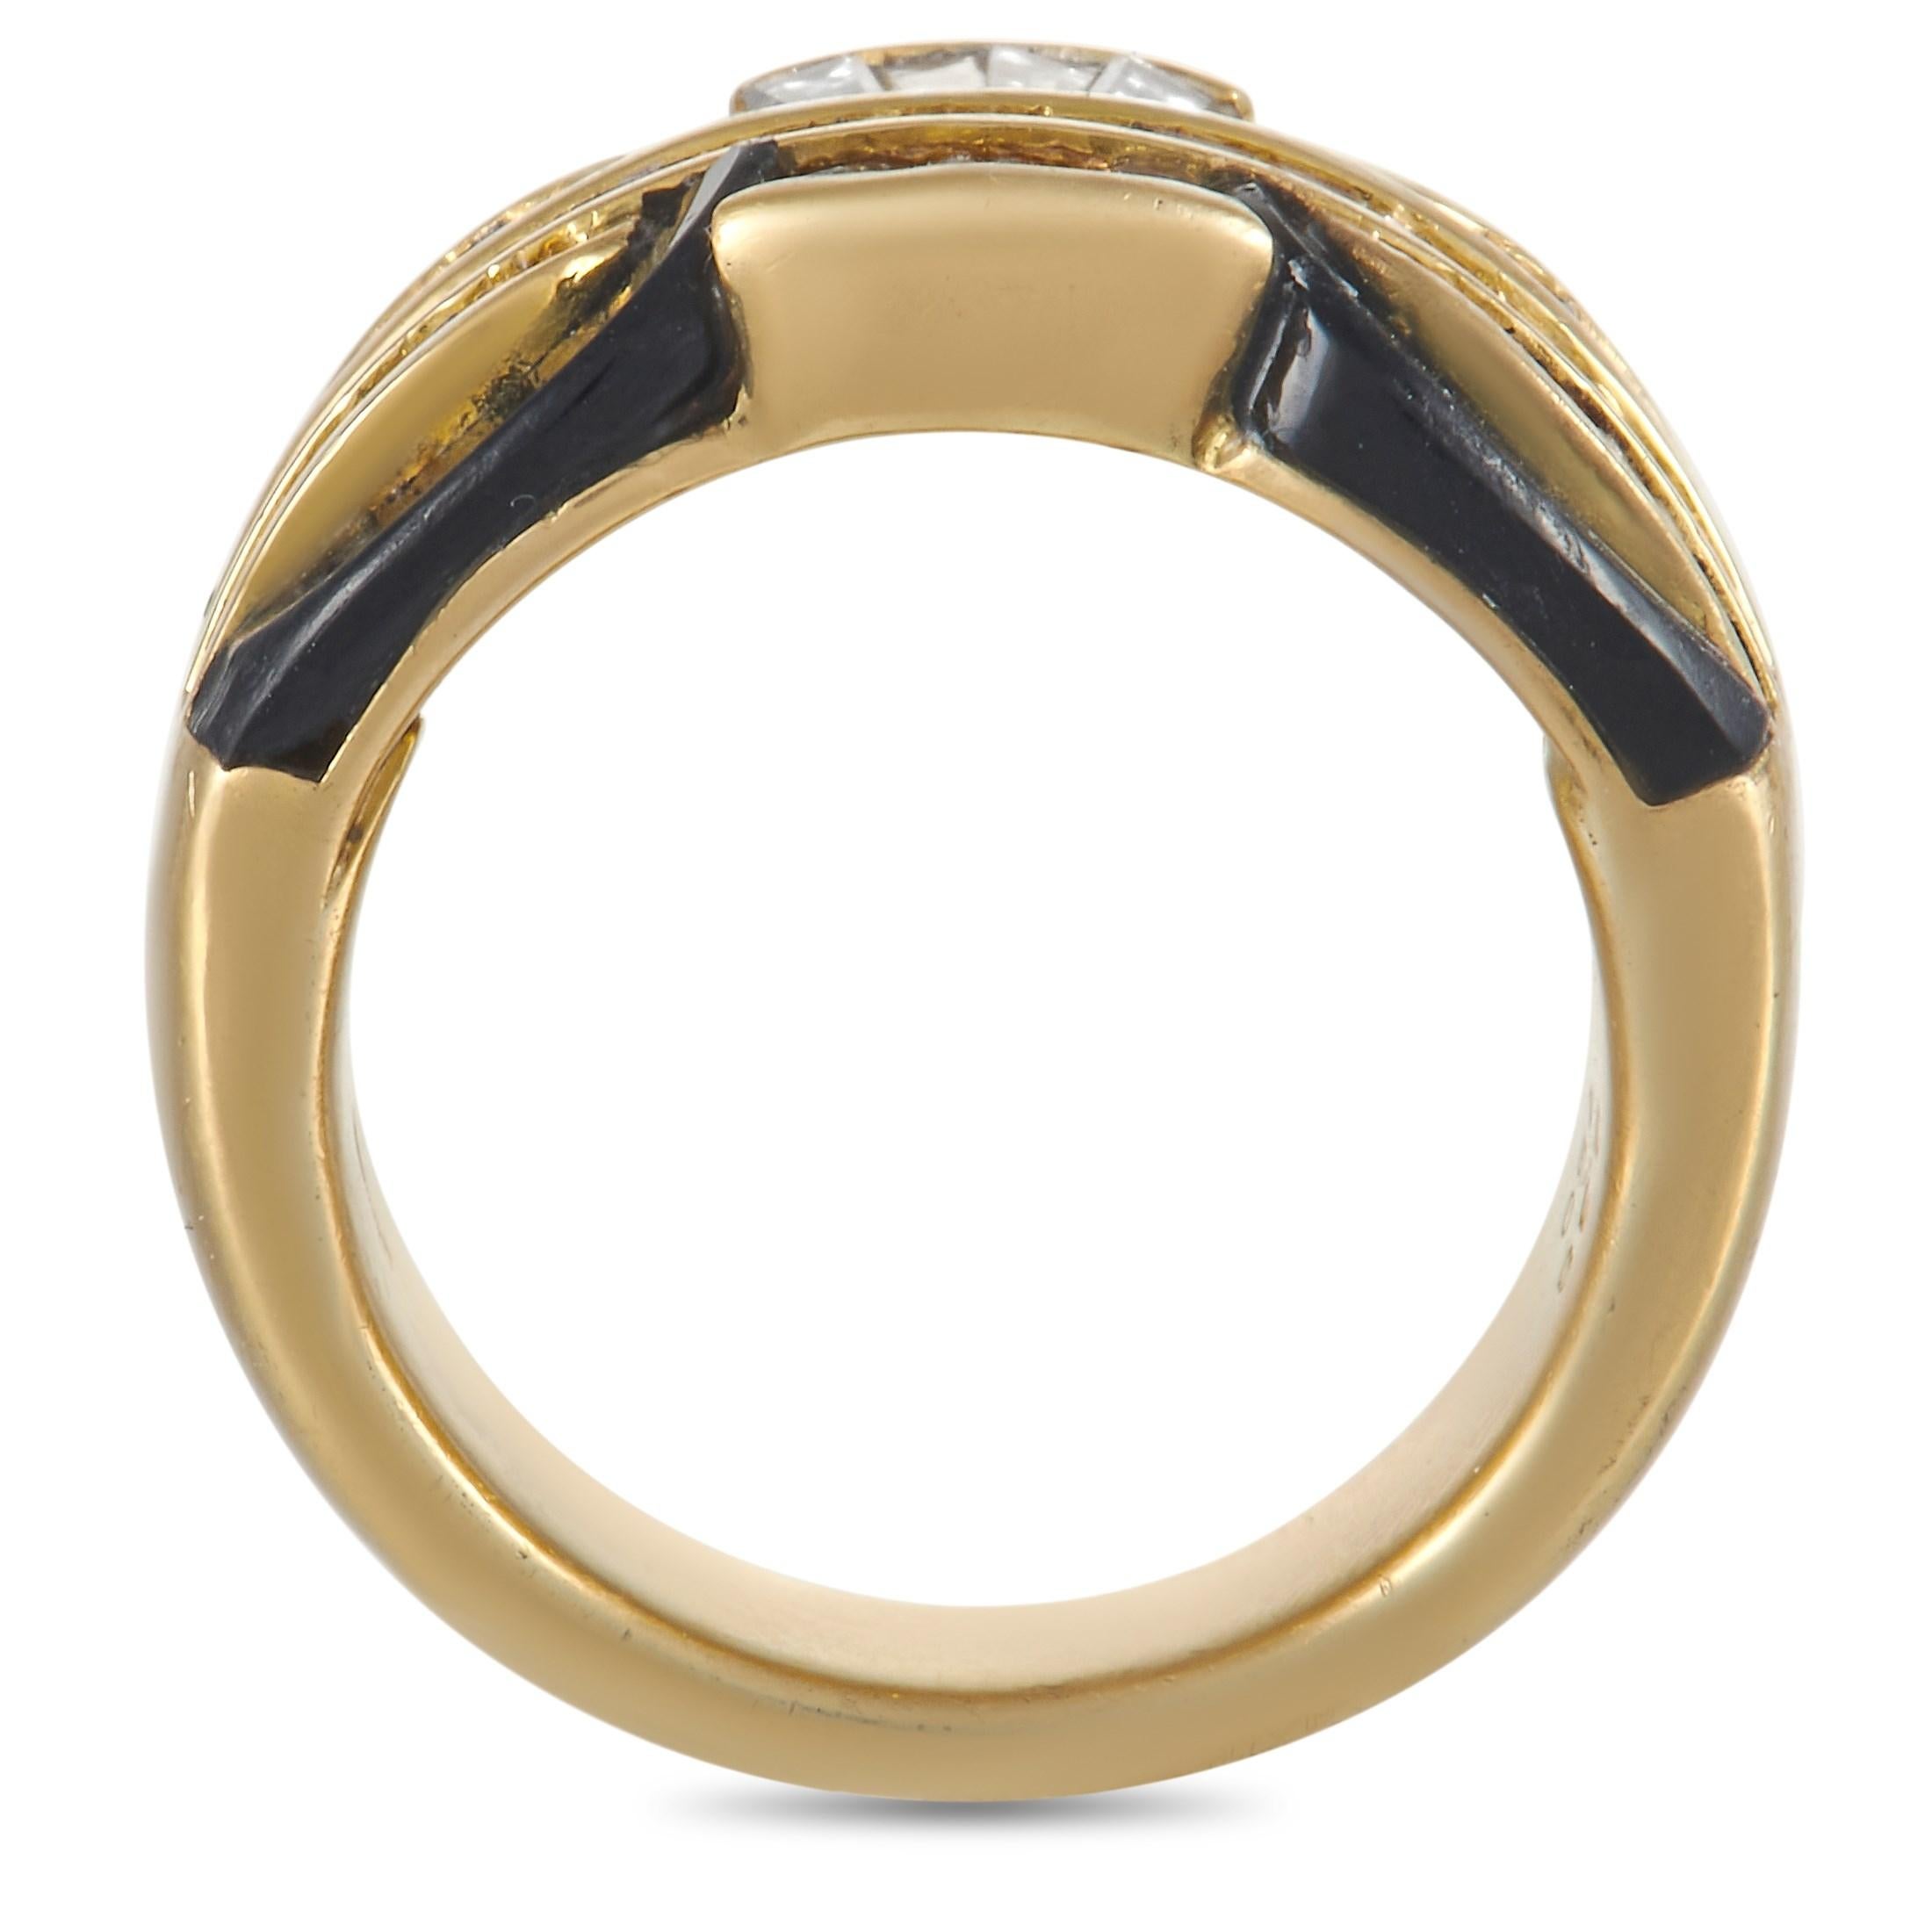 Want it black and white? The Damiani 18K Yellow Gold 2.38 ct Diamond and Onyx Wide Band Ring shows you how it's done. This ring features a 10mm wide band in yellow gold adorned with a black onyx panel amidst a formation of tapered baguette diamonds.